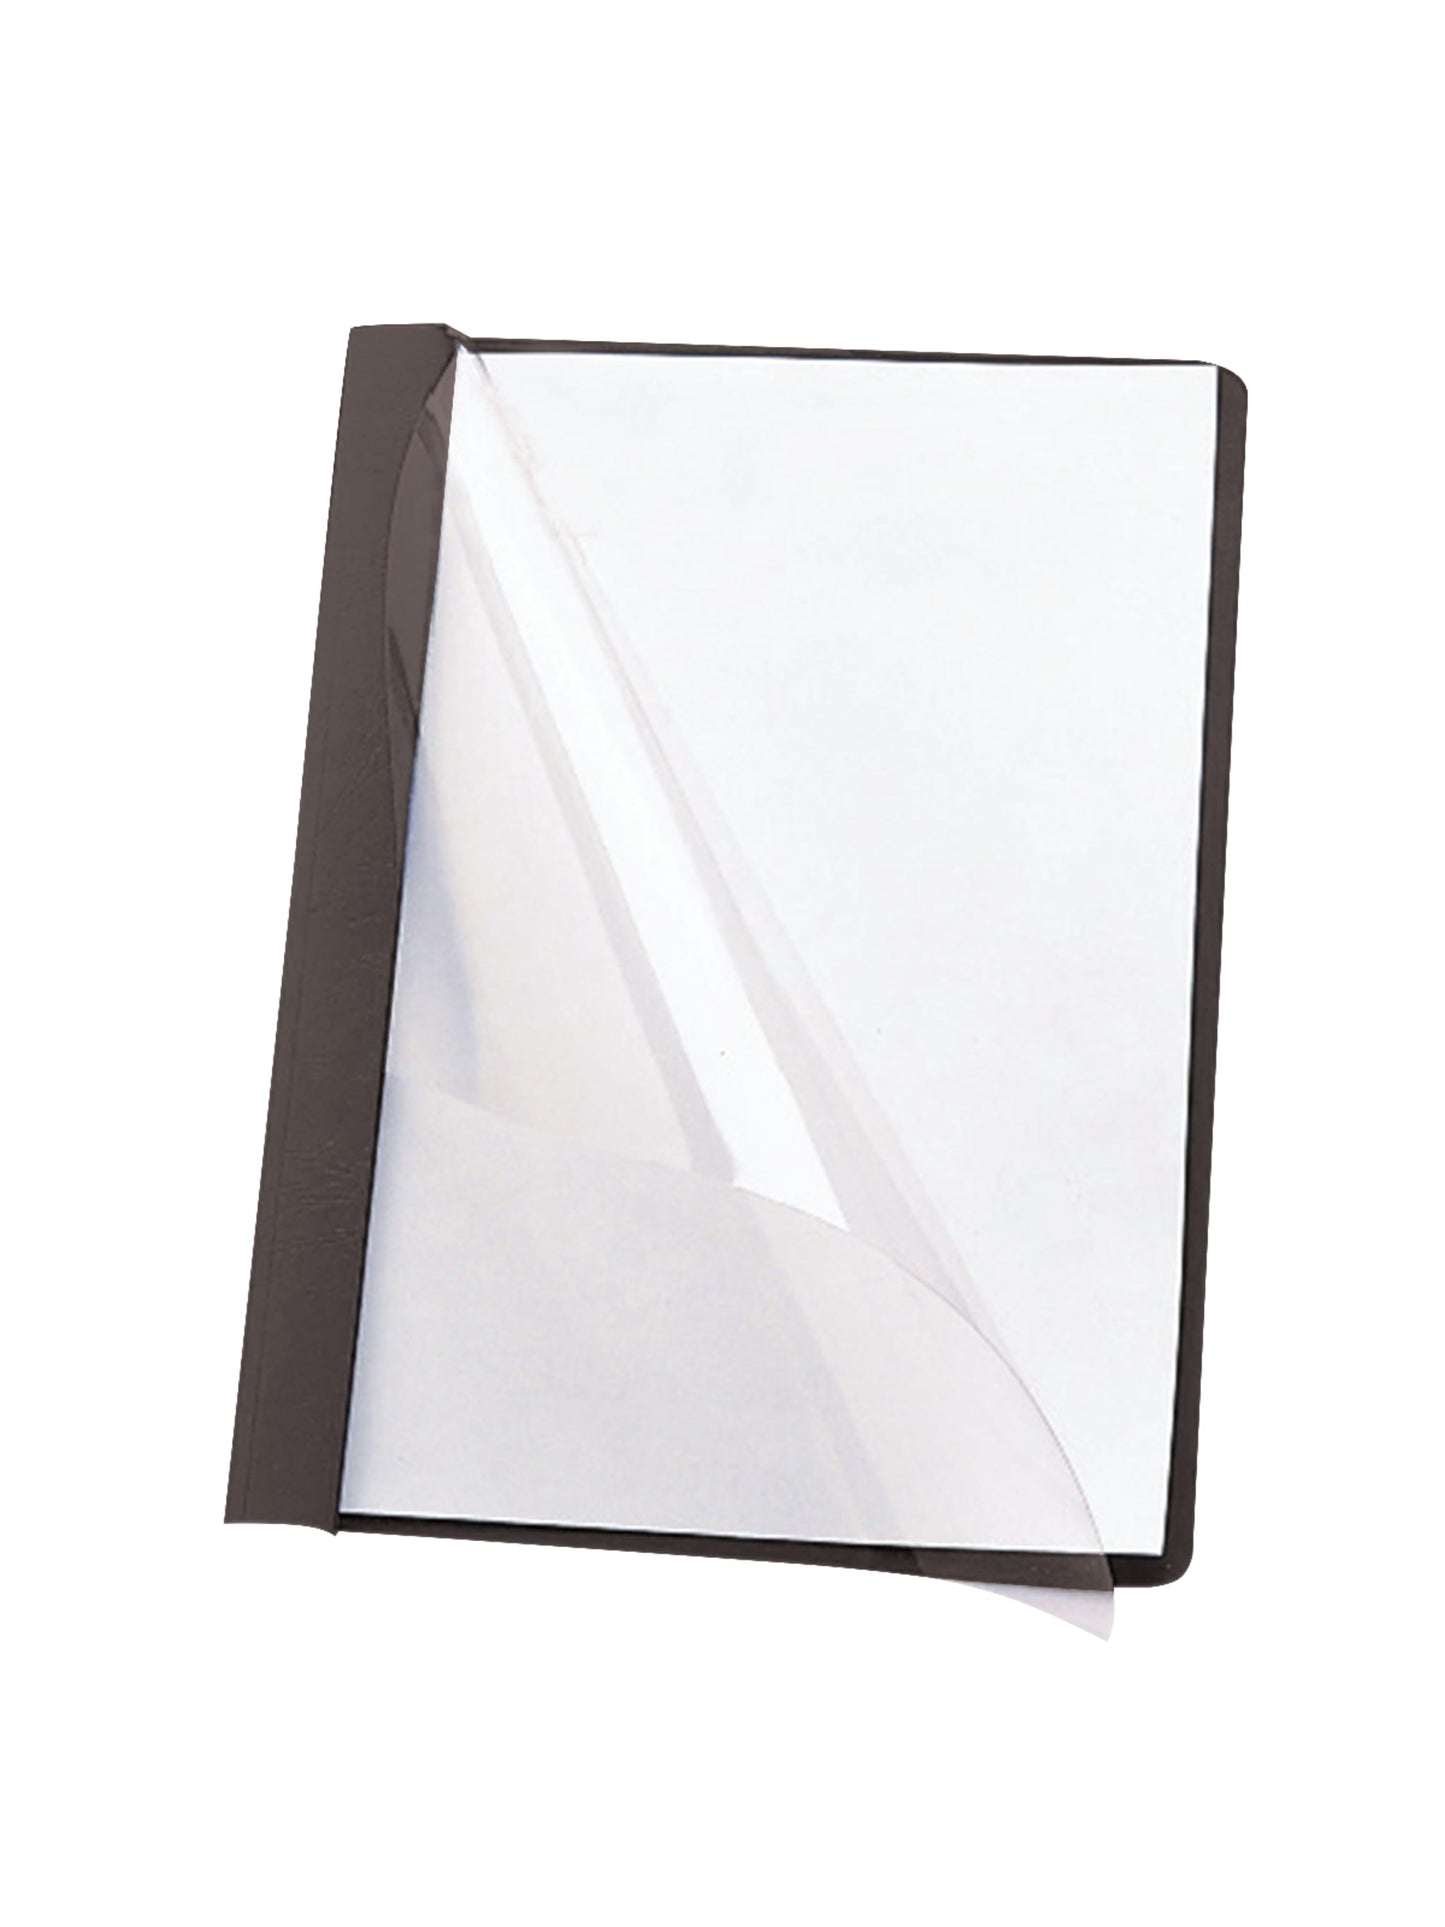 Heavyweight Paper Report Covers with Clear Front, Black Color, Letter Size, Set of 0, 30086486874534